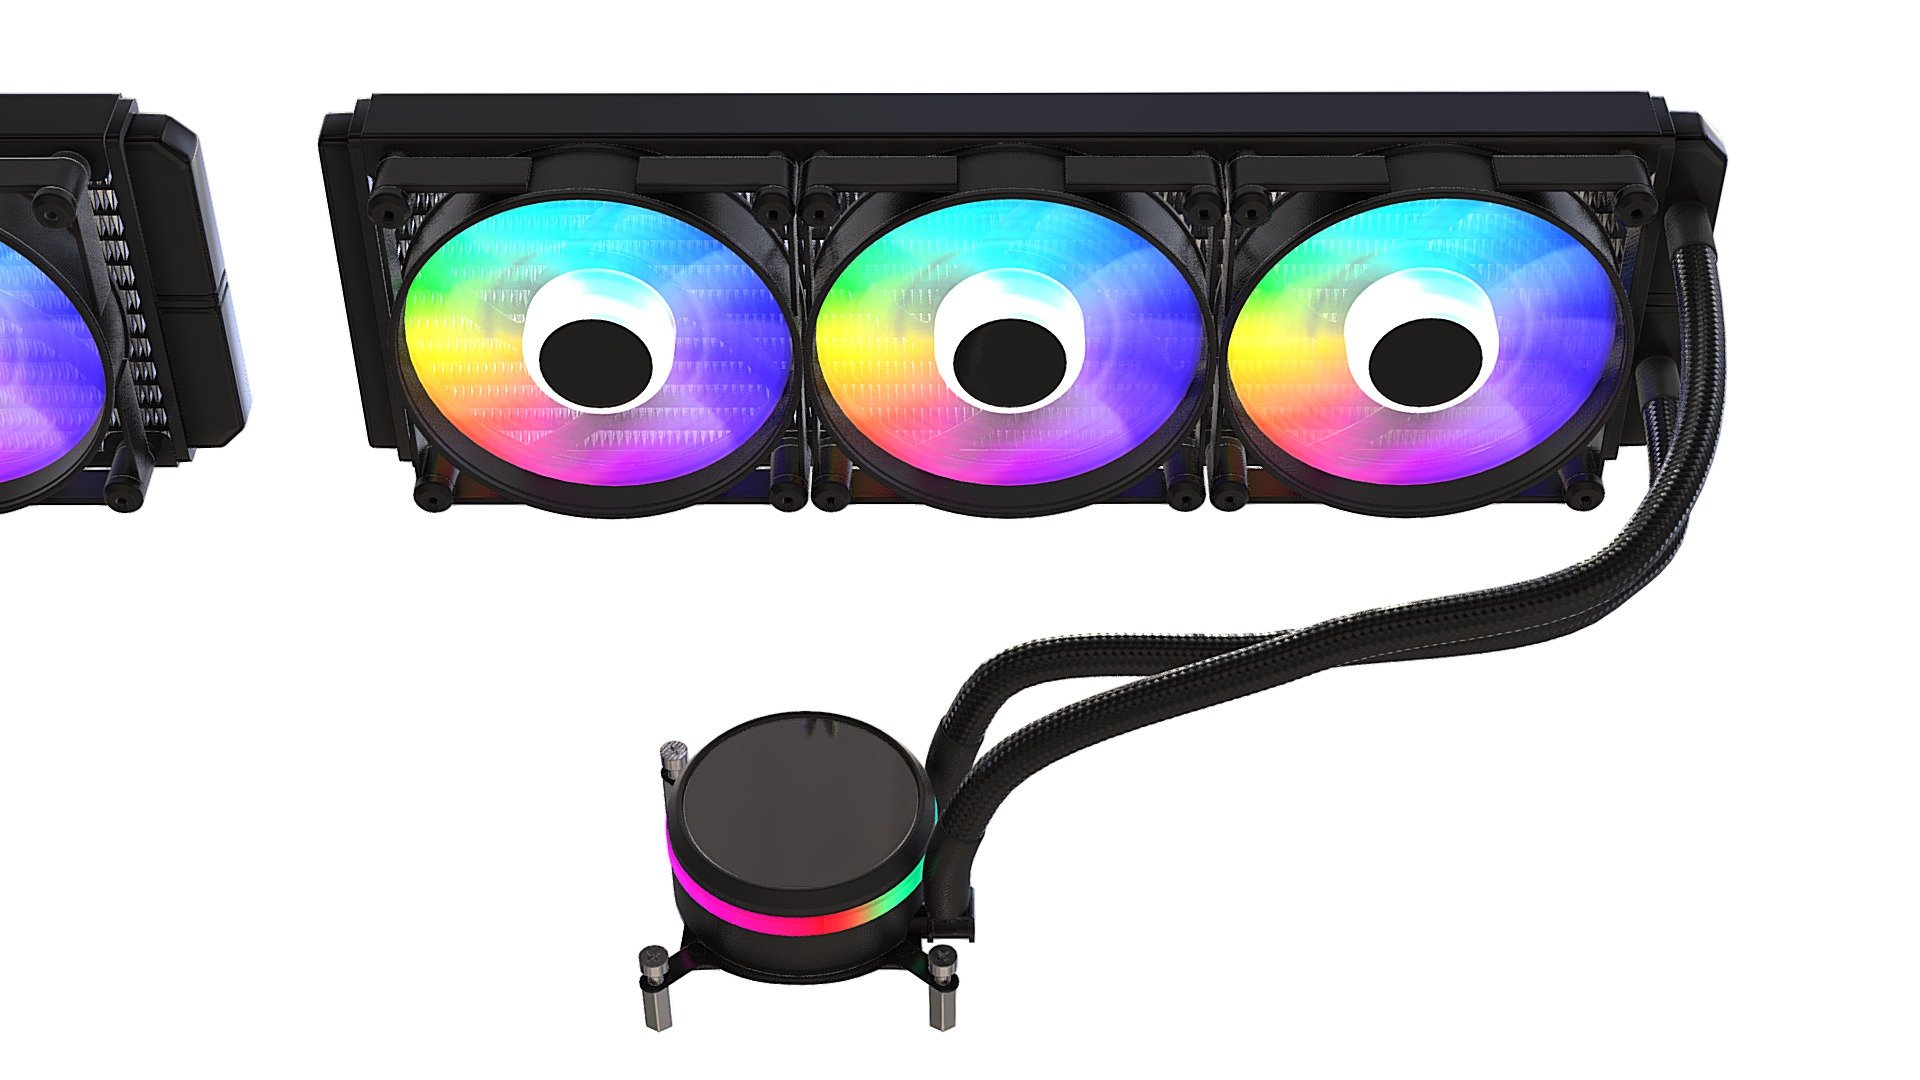 High-detailed 3d model of Generic CPU Liquid Cooler

Ready to use in any software

For questions about 3d models write here: andreyfedyushov@gmail.com - CPU Liquid Cooler - 3D model by digitalrazor3d 3d model